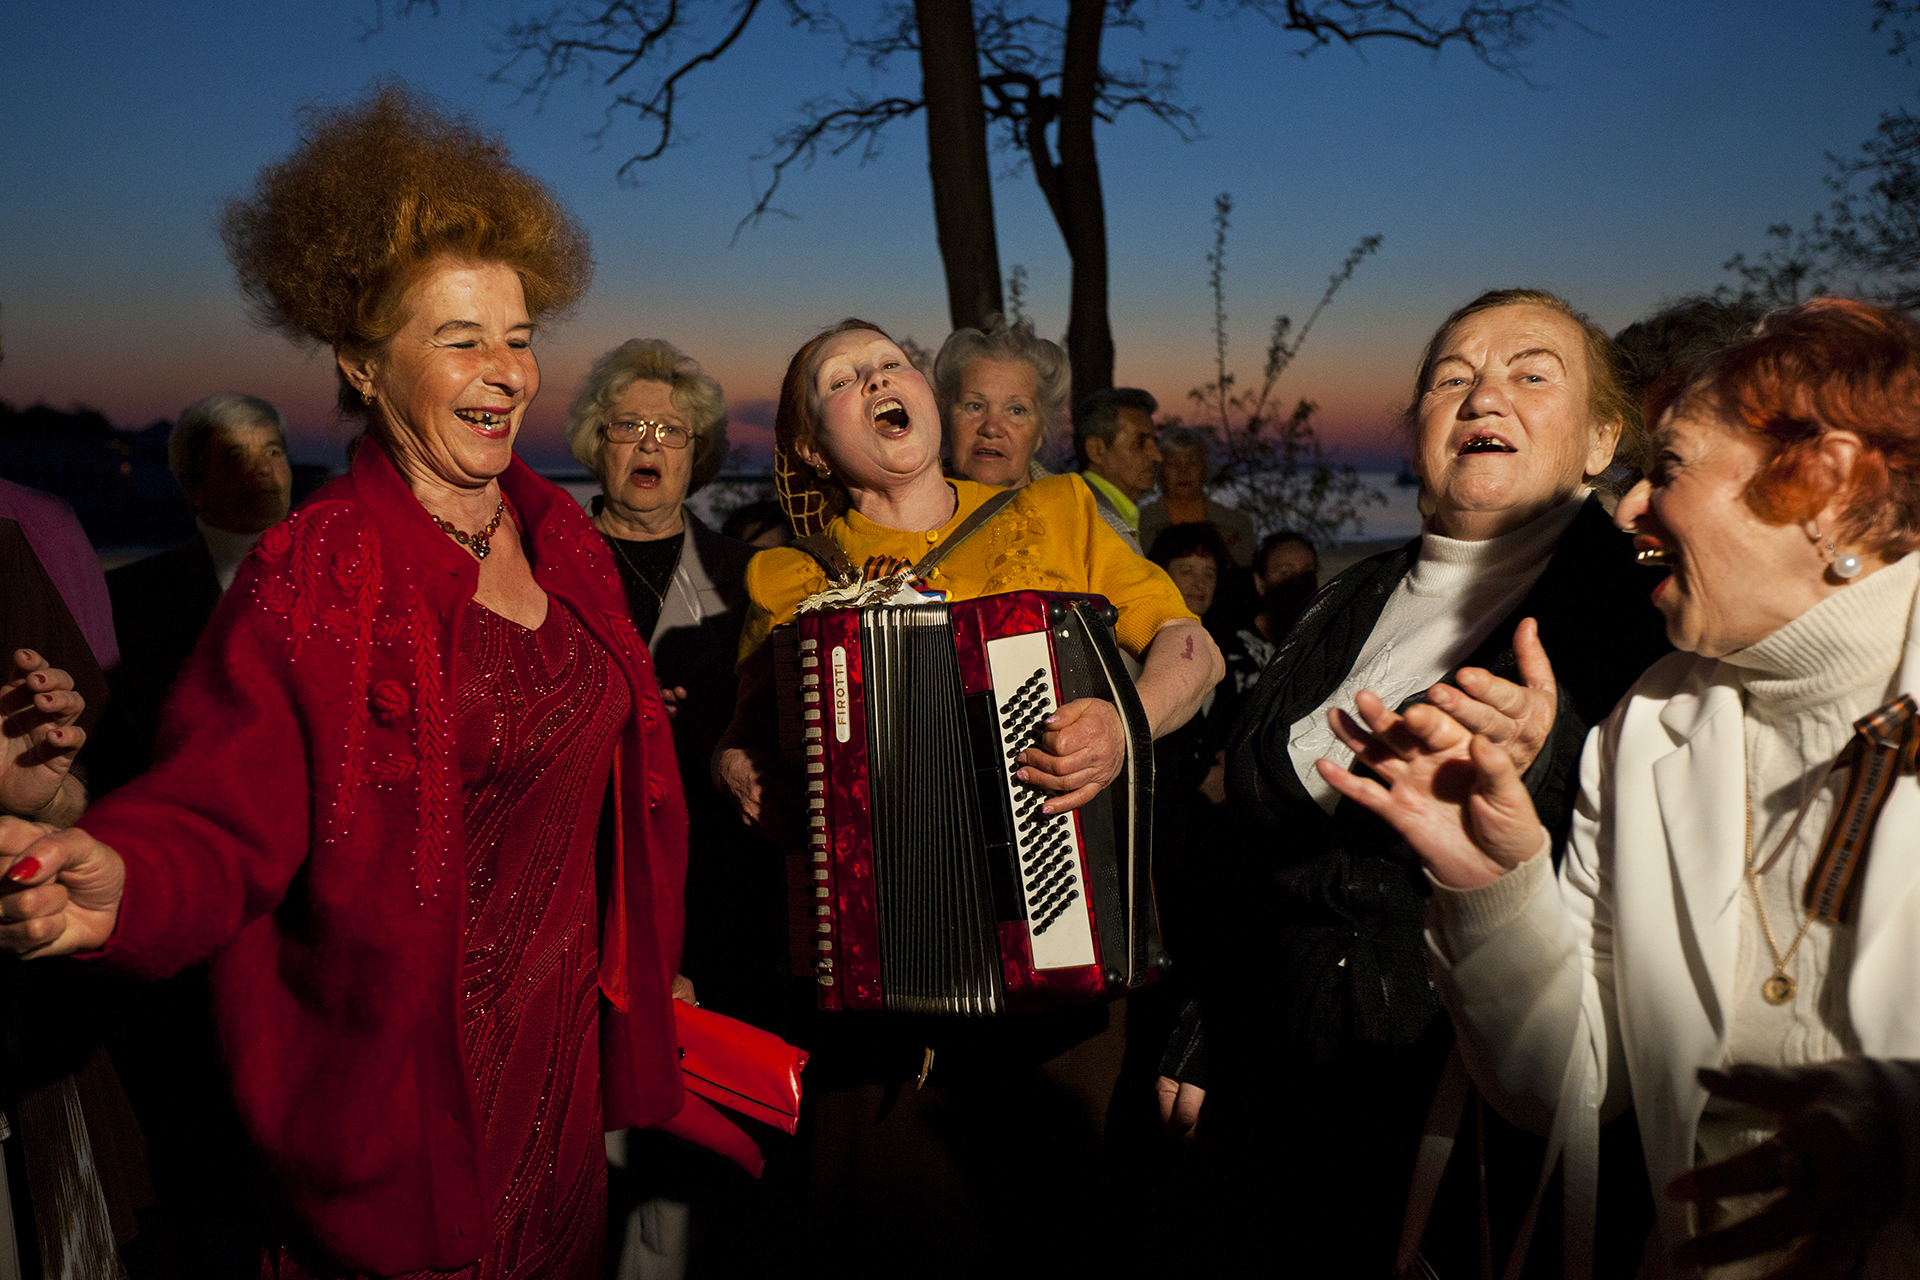  Chords of friendship bind accordionist Olesya Kamovich and comrades, who meet Sundays in Sevastopol on the promenade to sing and dance into the early night.  Sevastopol, Crimea  